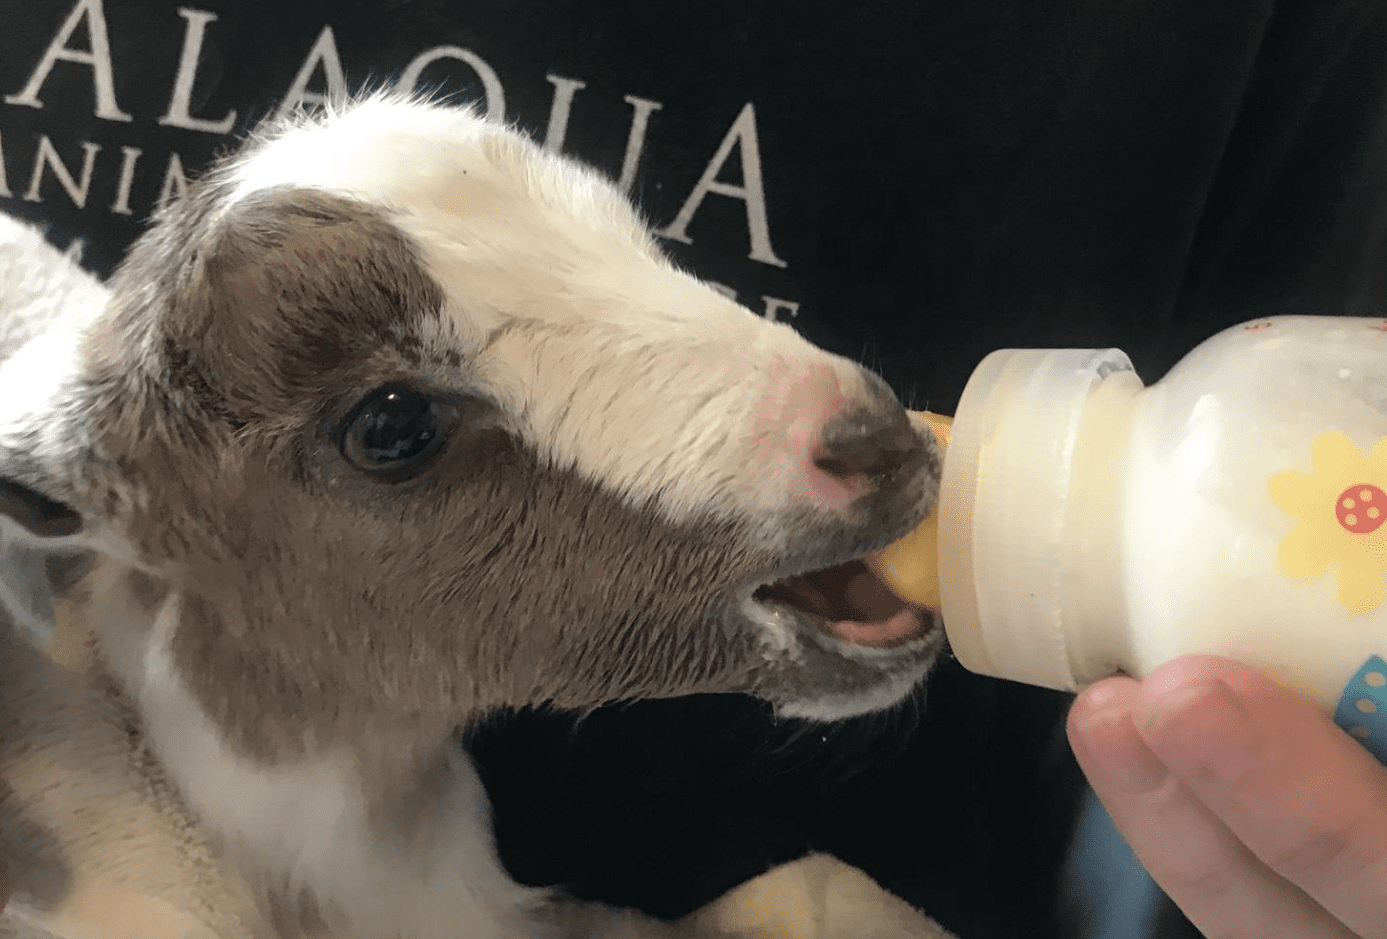 Baby goat drinking from bottle